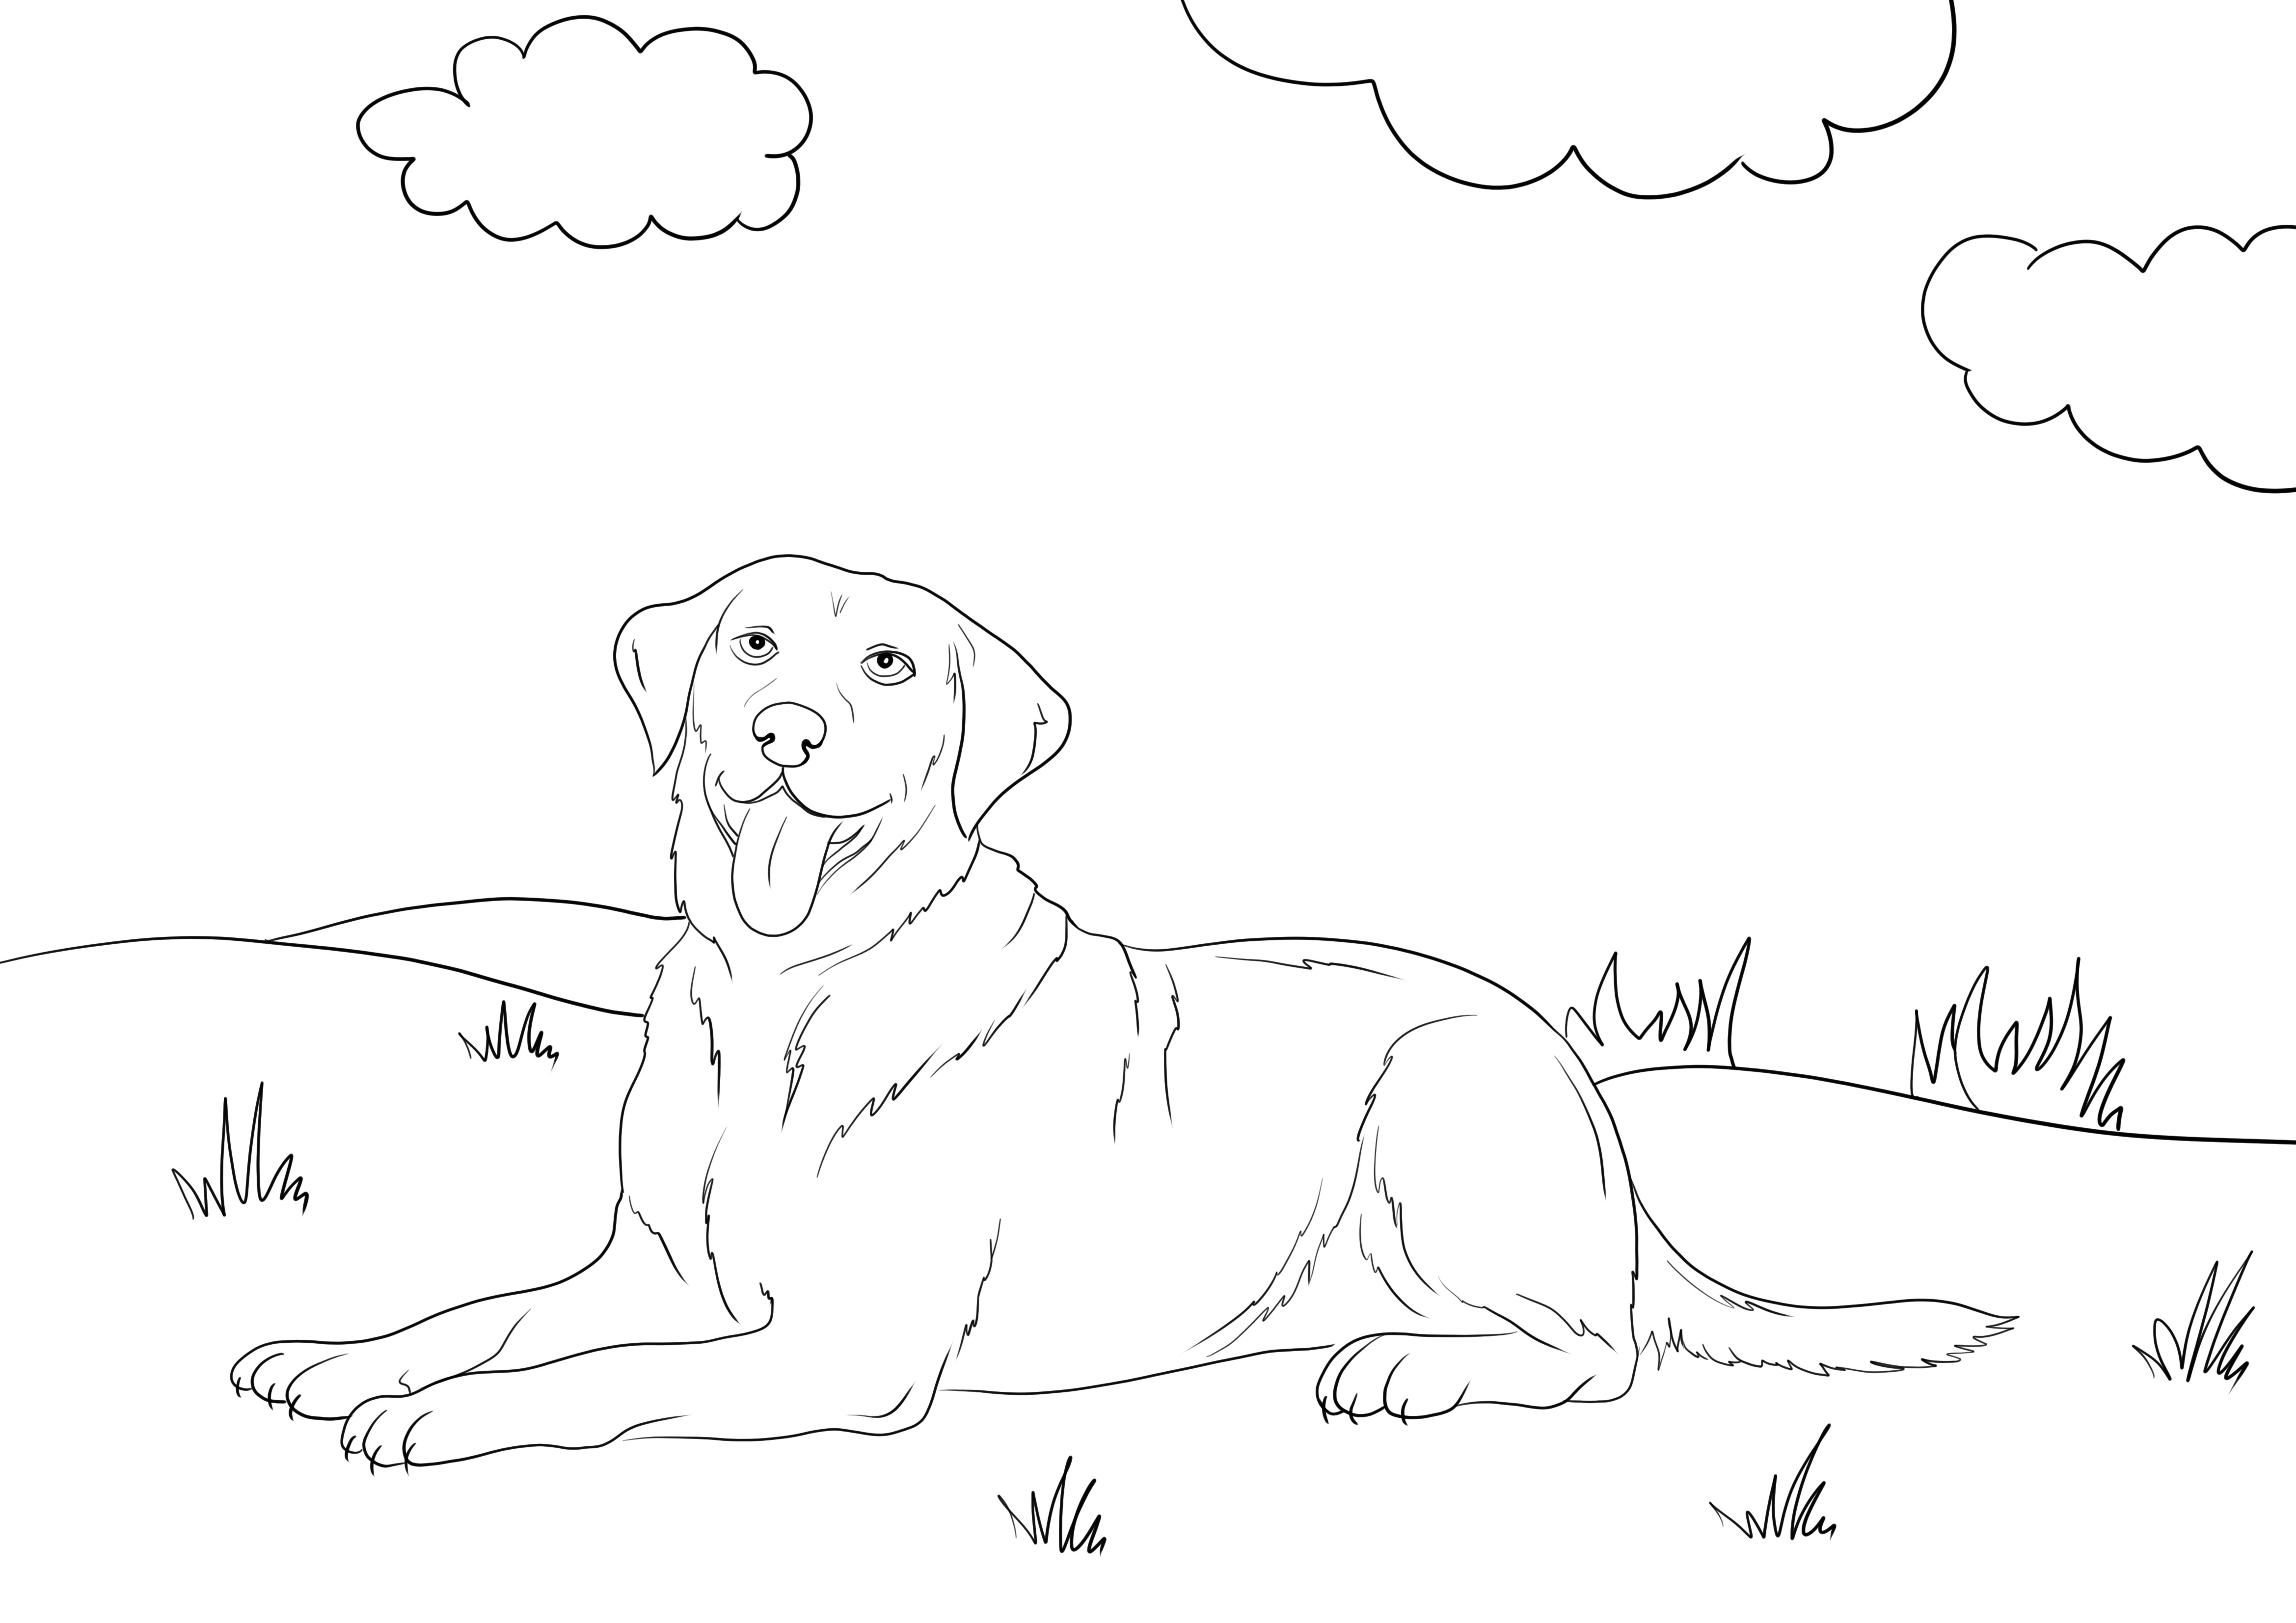 Labrador retriever coloring picture free to download and color